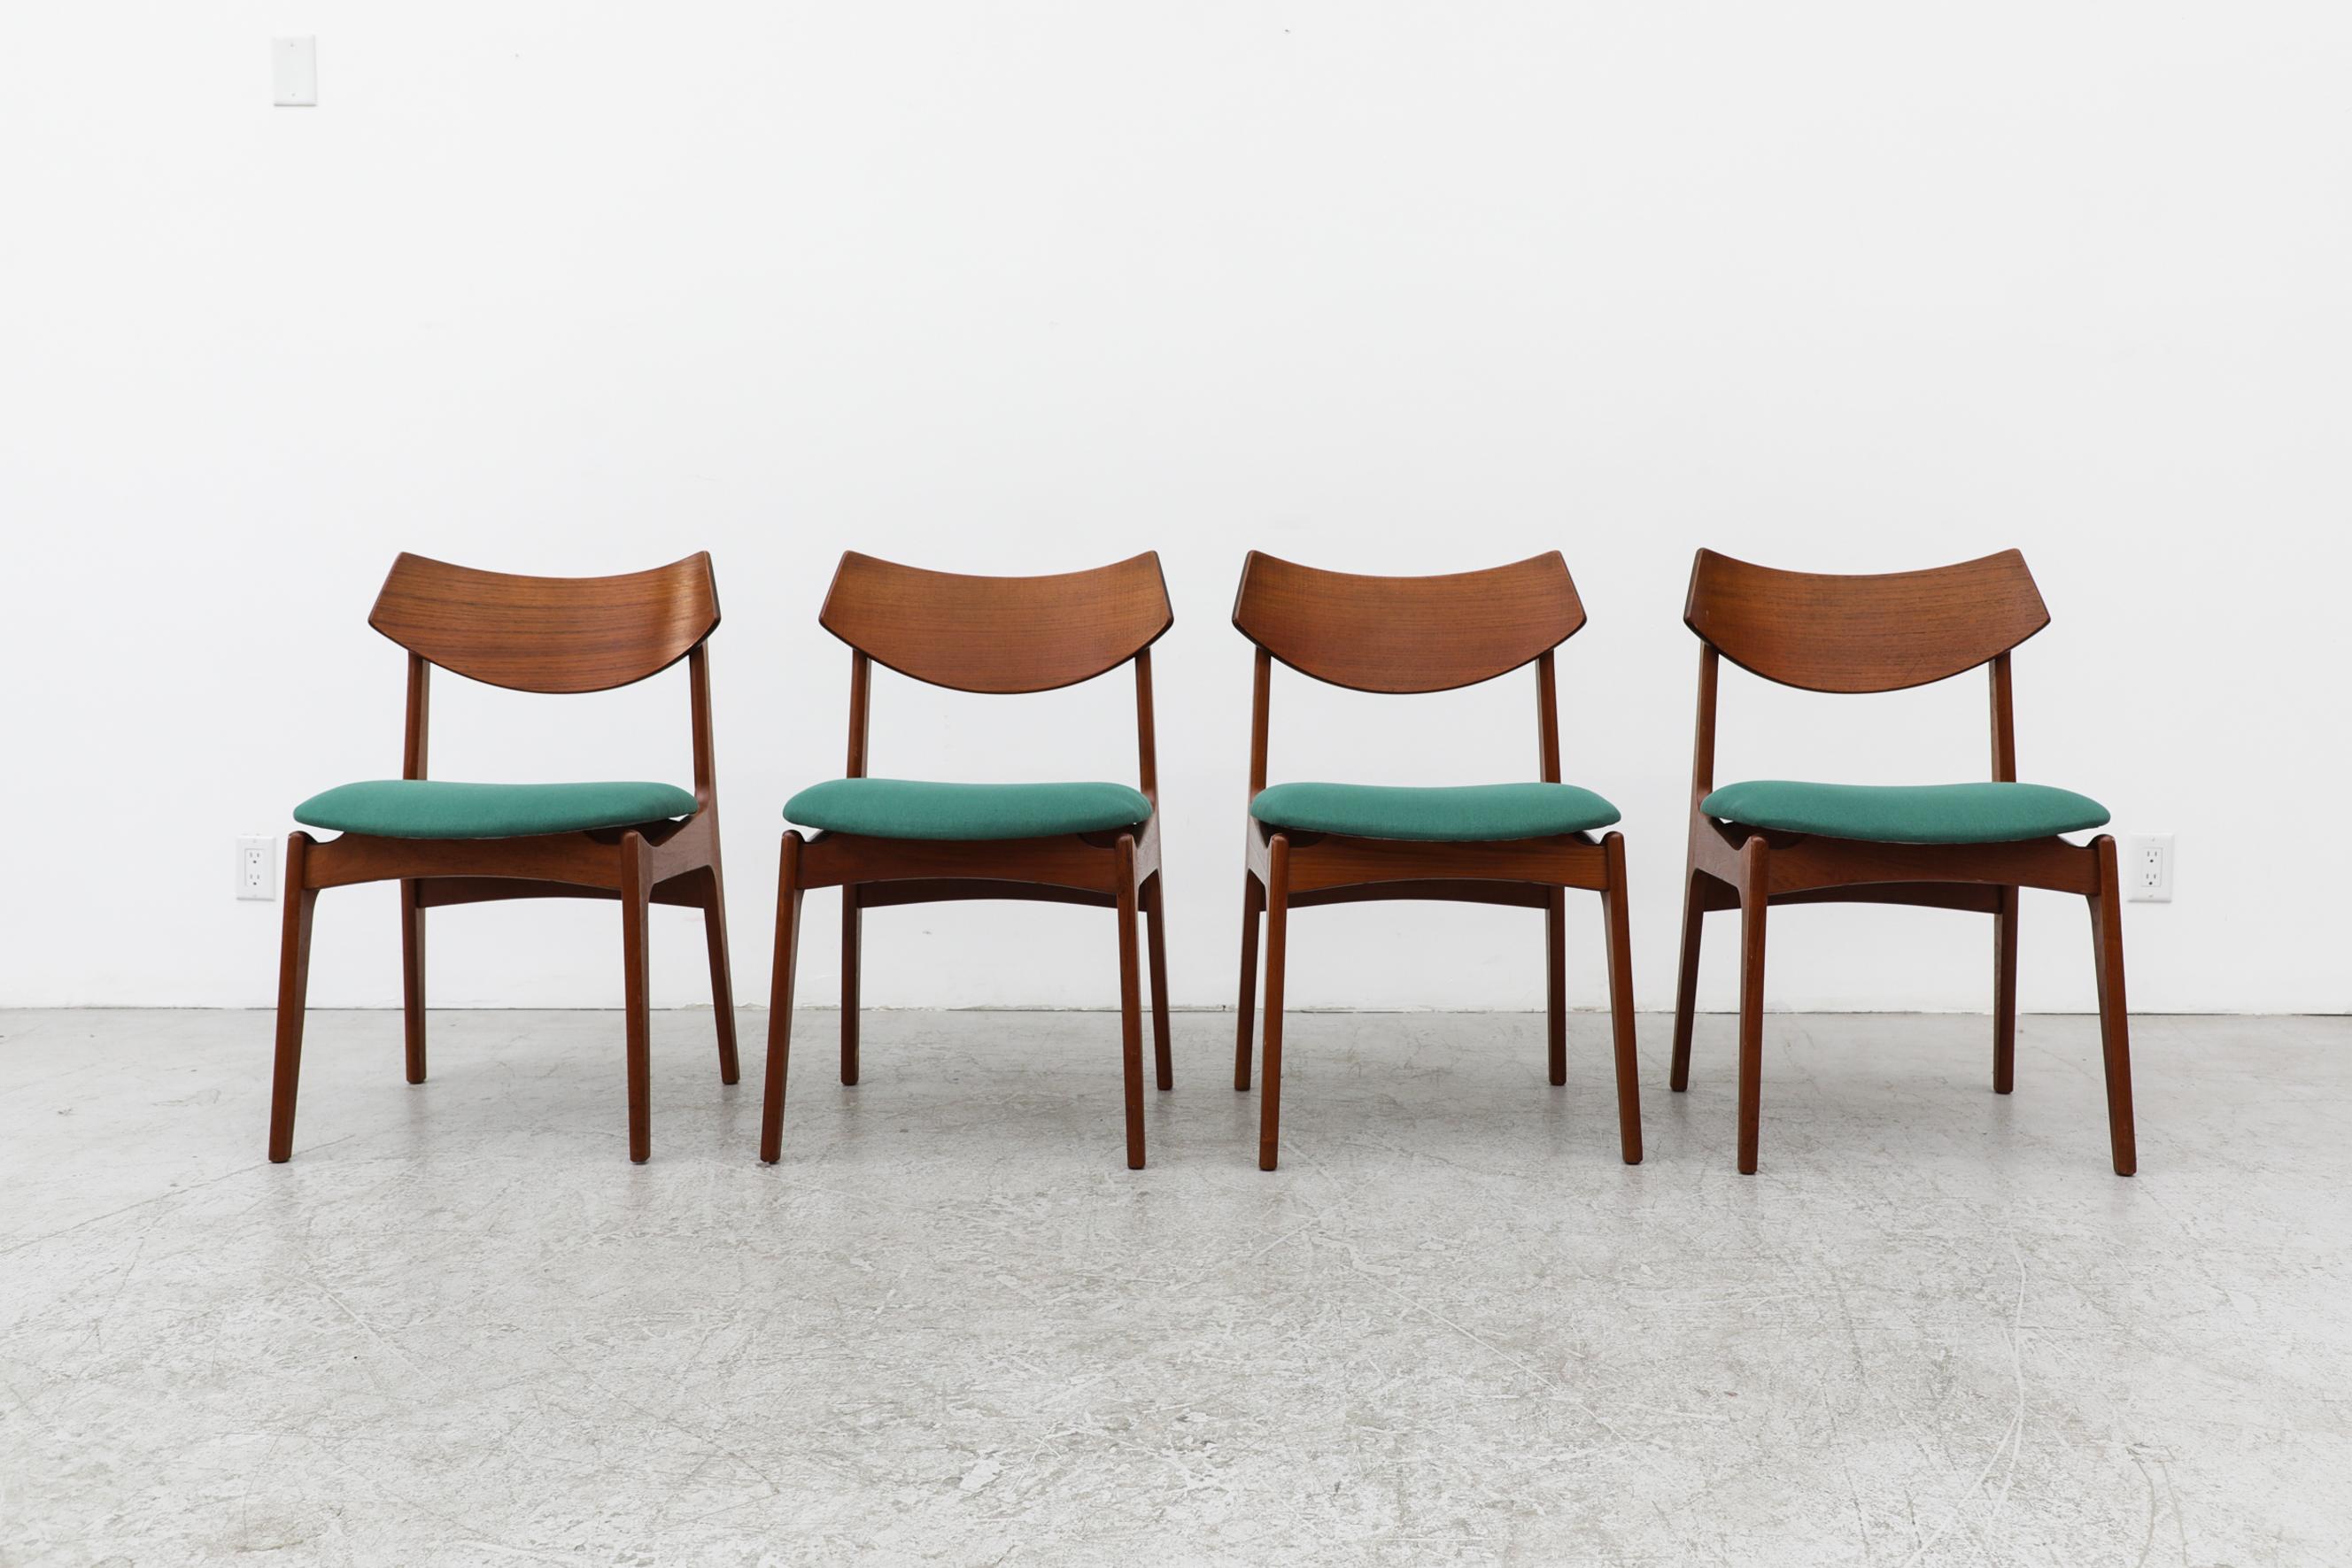 Set of 4 Danish teak dining chairs with teal upholstered seats and smiling backrests. by Funder Schmidt + Madsen. Danish furniture maker Funder-Schmidt & Madsen was highly respected for their excellent quality and superior craftsmanship. These